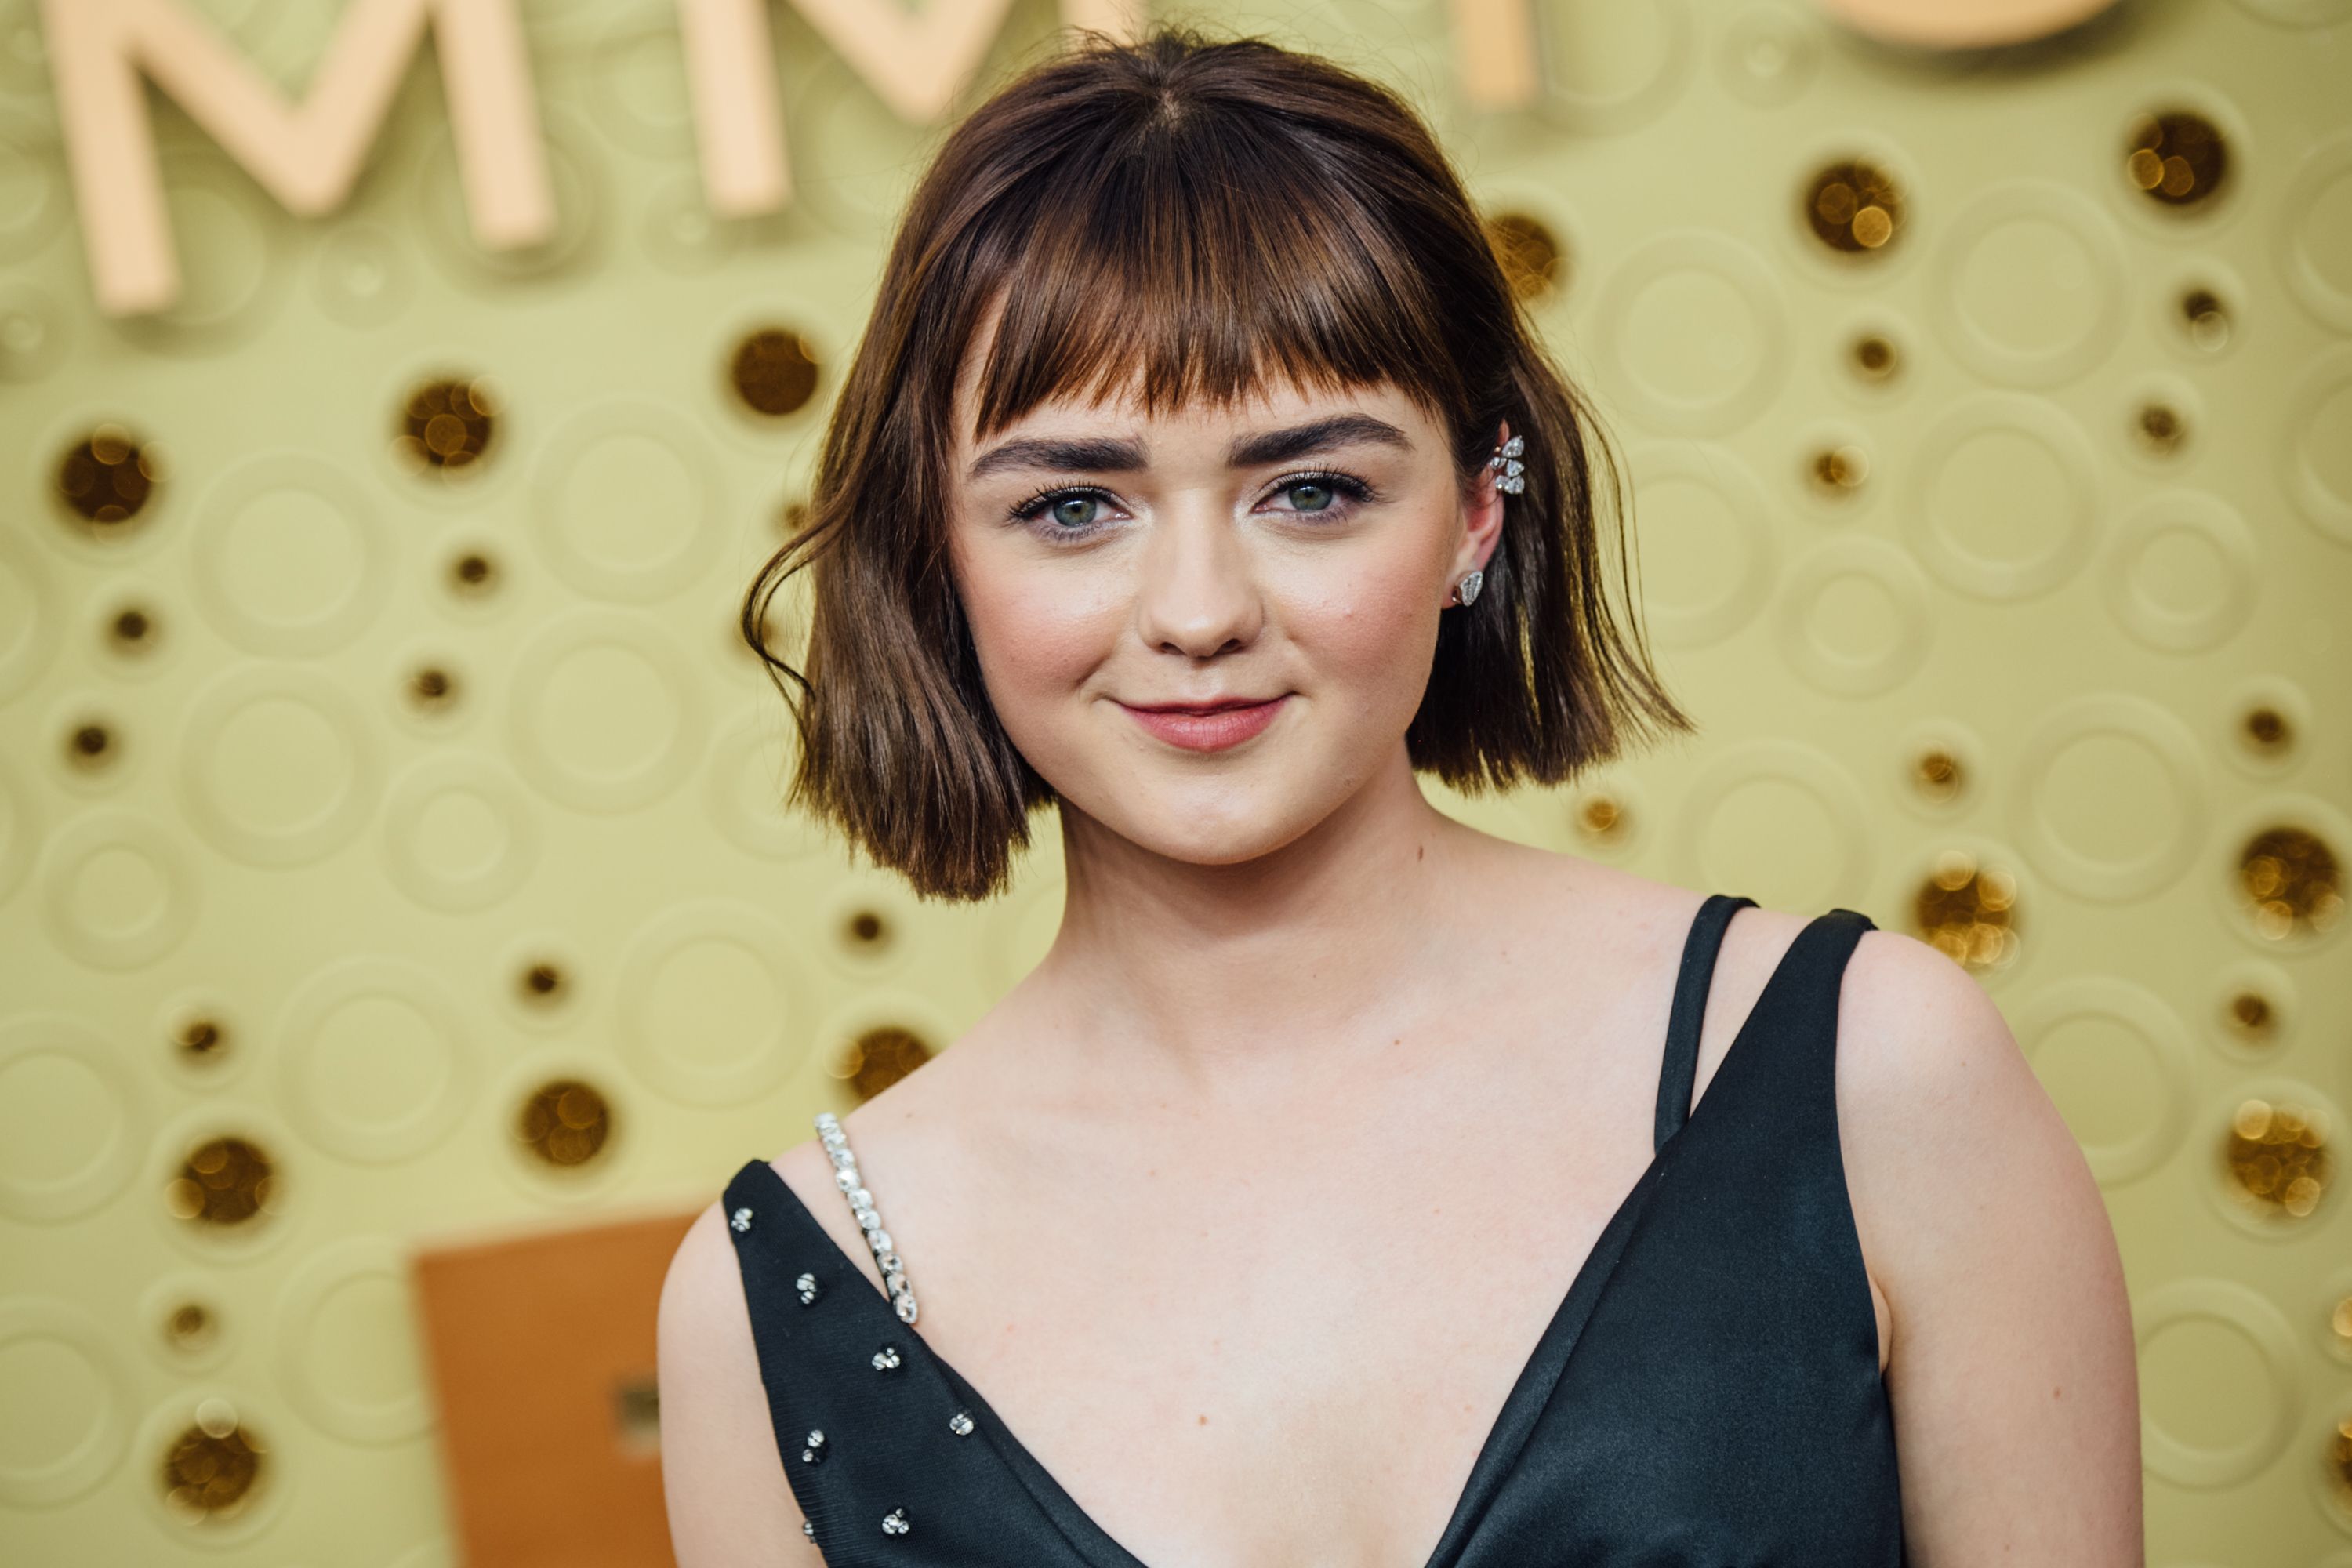 Maisie Williams during the 71st Emmy Awards at Microsoft Theater on September 22, 2019 in Los Angeles, California. | Source: Getty Images